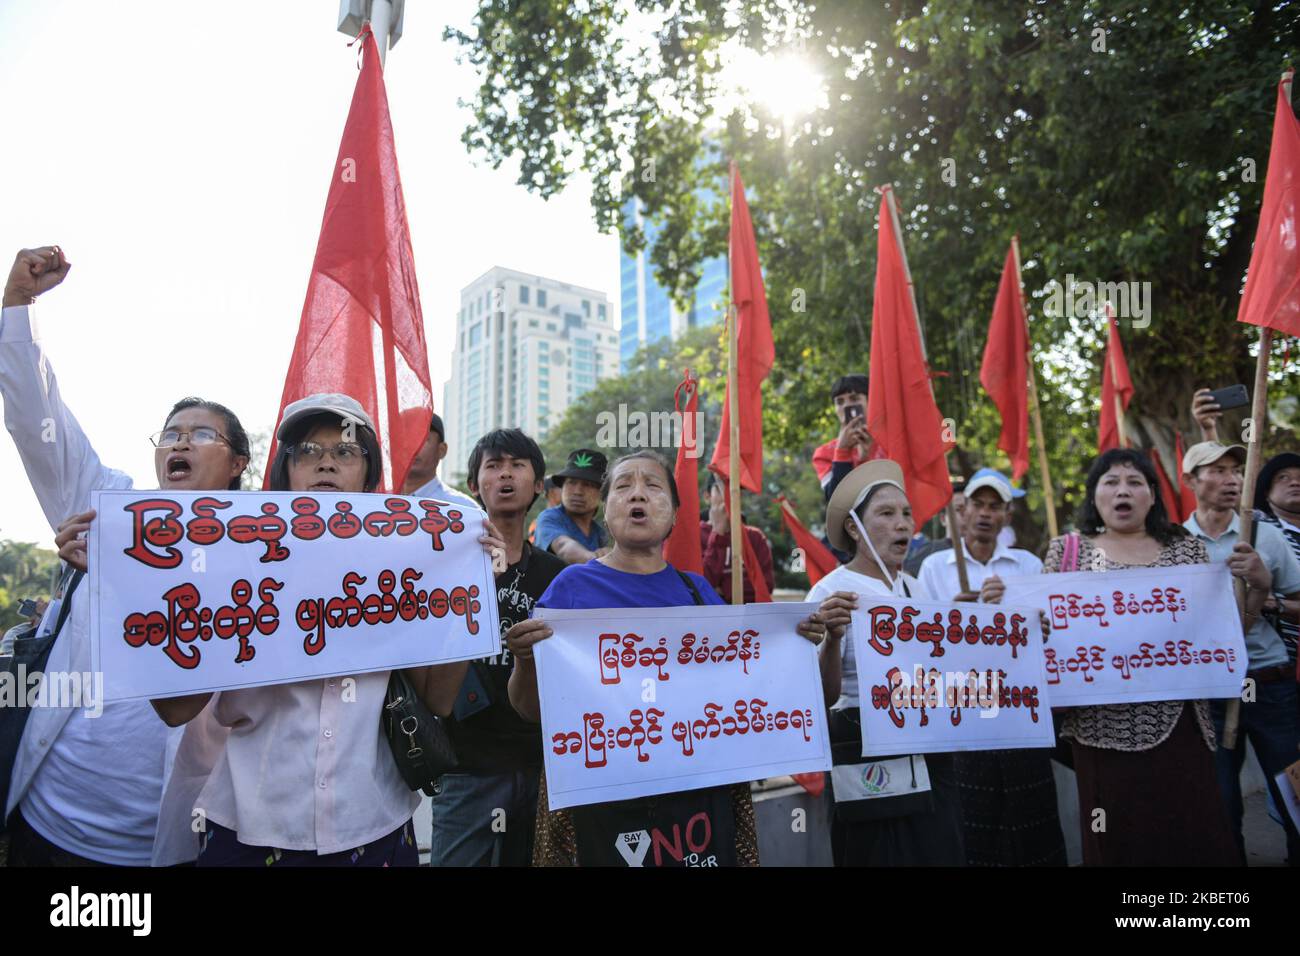 Protesters join a protest against Myit Sone Dam project in Yangon, Myanmar on 18 January, 2019. The protest held at the same time Chinese President Xi Jinping’s visit to Myanmar. Myit Sone Dam project in Kachin State is funded by China’s state-owned State Power Investment Corporation. The project began in 2009 and suspended in September 2011 after nation wide public protests. (Photo by Shwe Paw Mya Tin/NurPhoto) Stock Photo